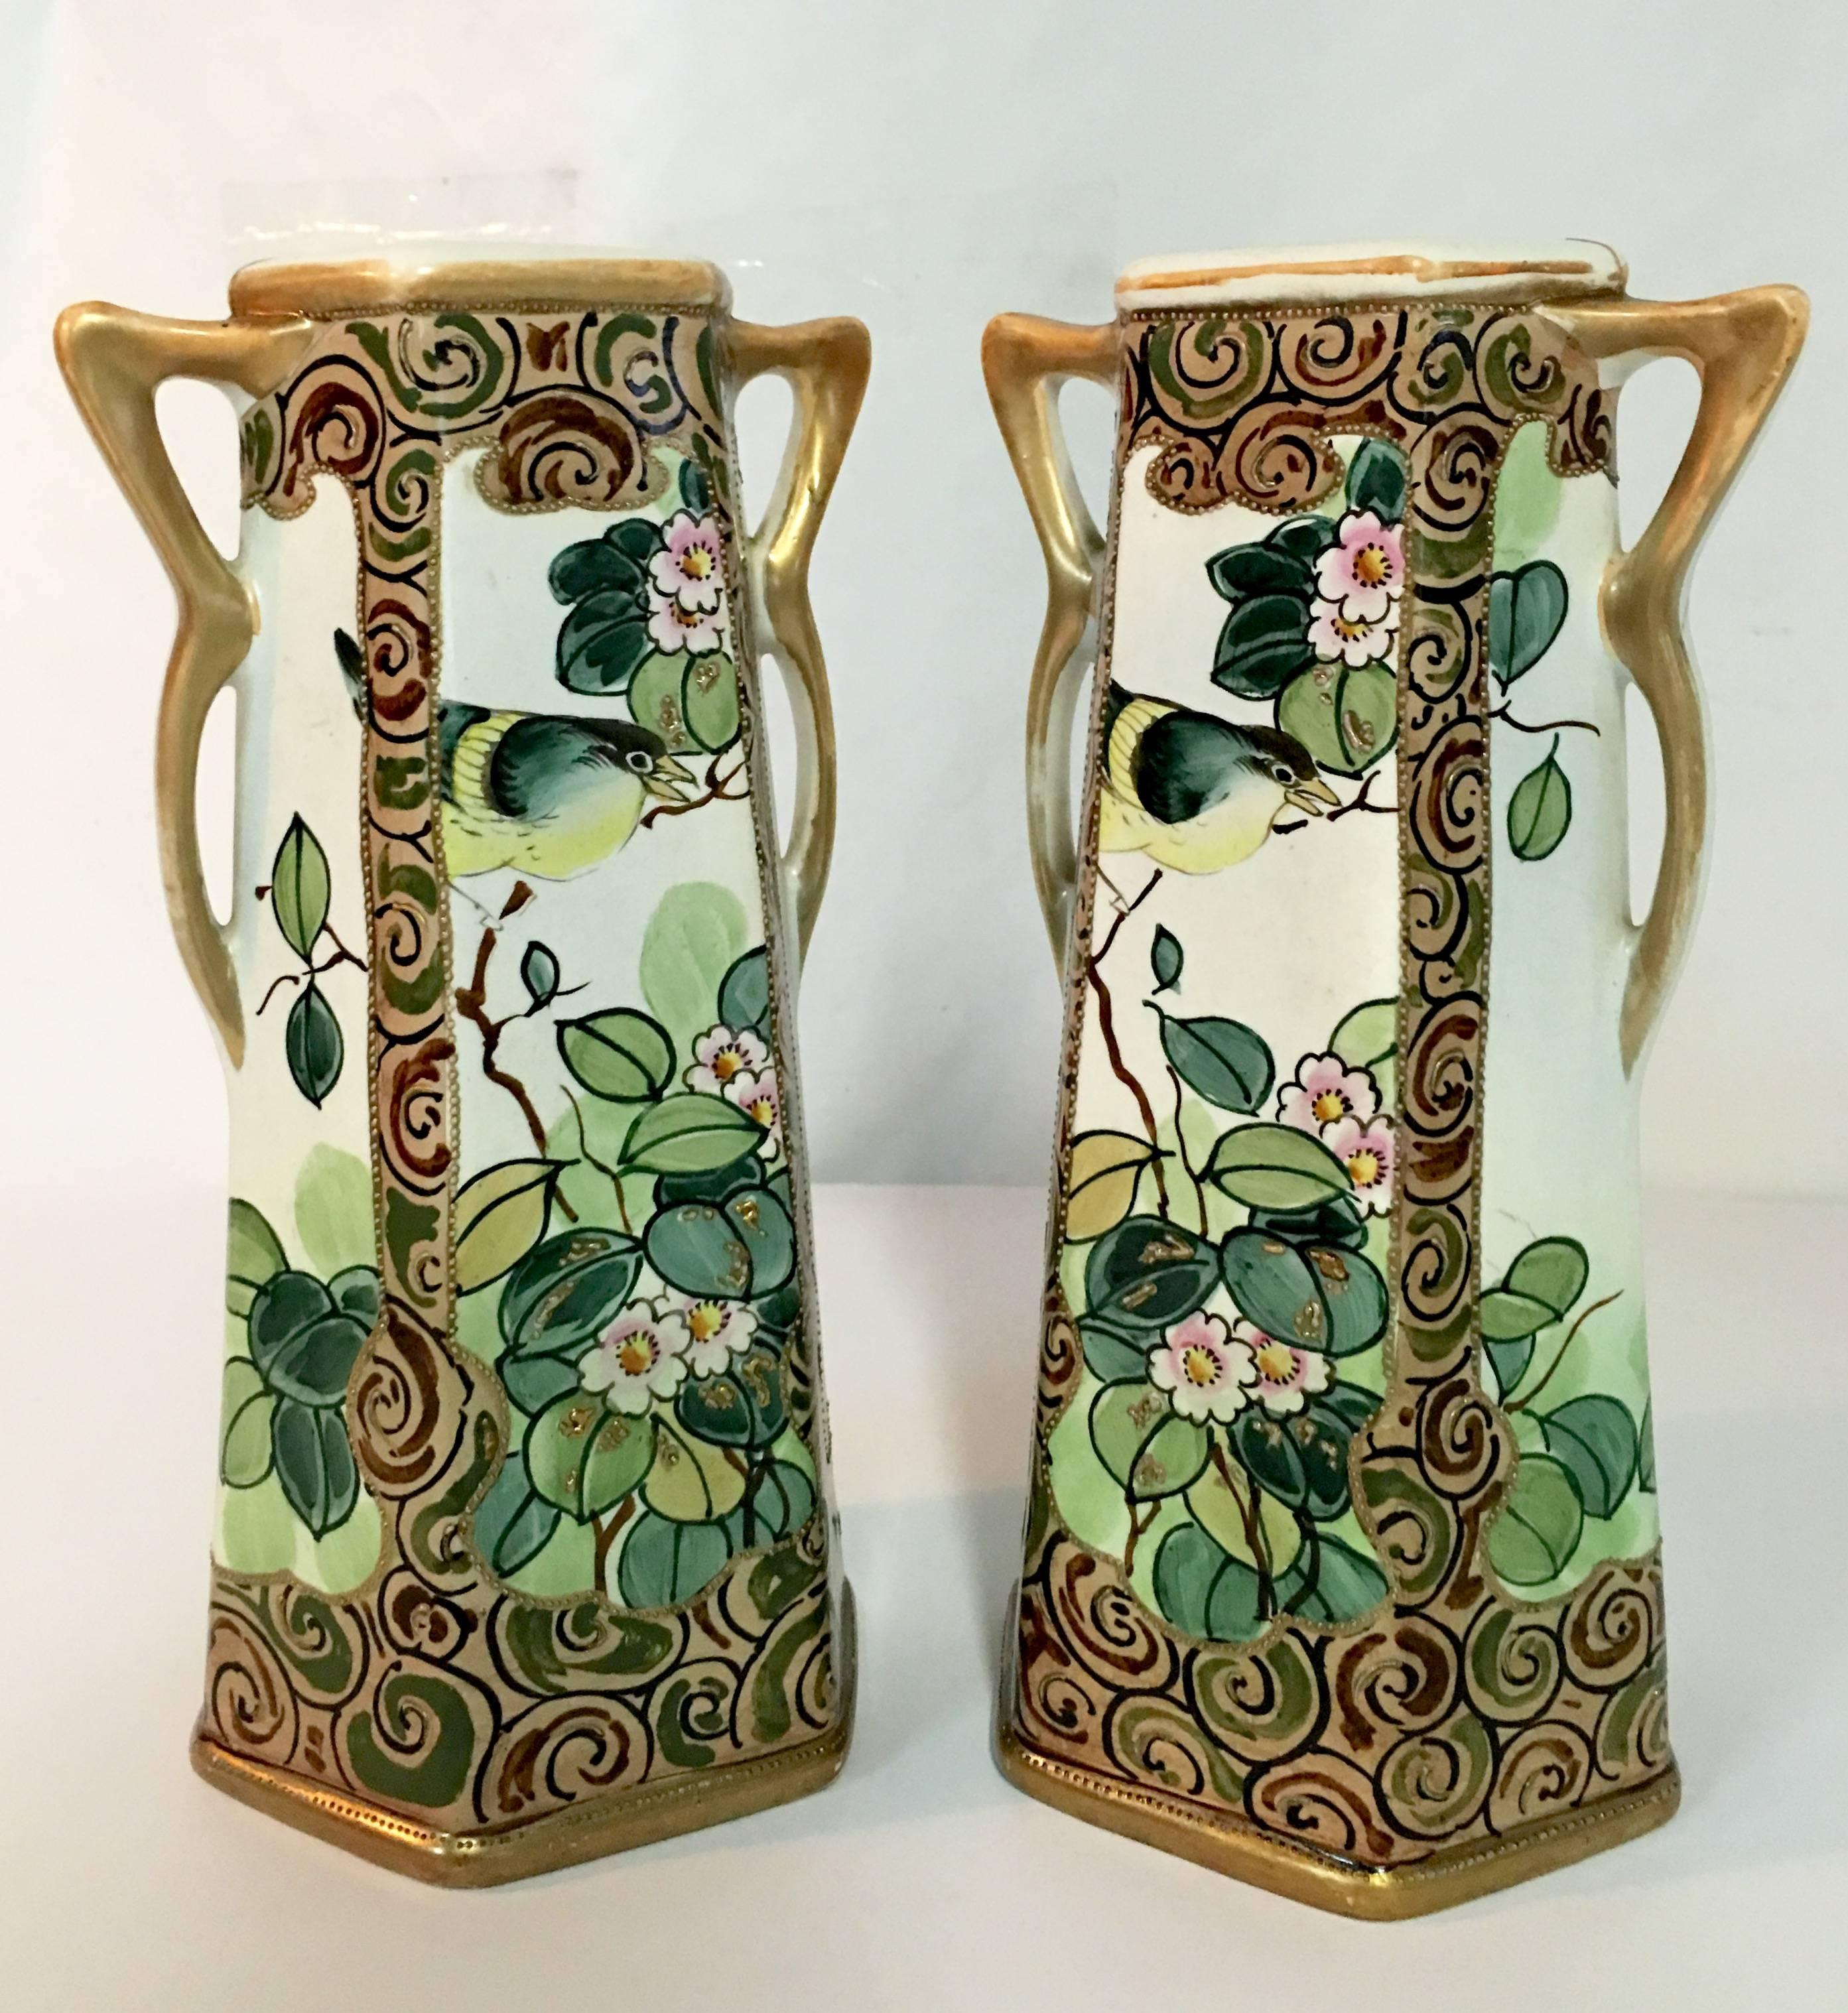 Rare pair of white ground with browns, greens, yellow, pinks and 22-karat gold moriage and trim detail identical five-panel double handle porcelain vases, 1920s. Each vase is signed on the underside hand-painted Royal Nishiki Nippon.